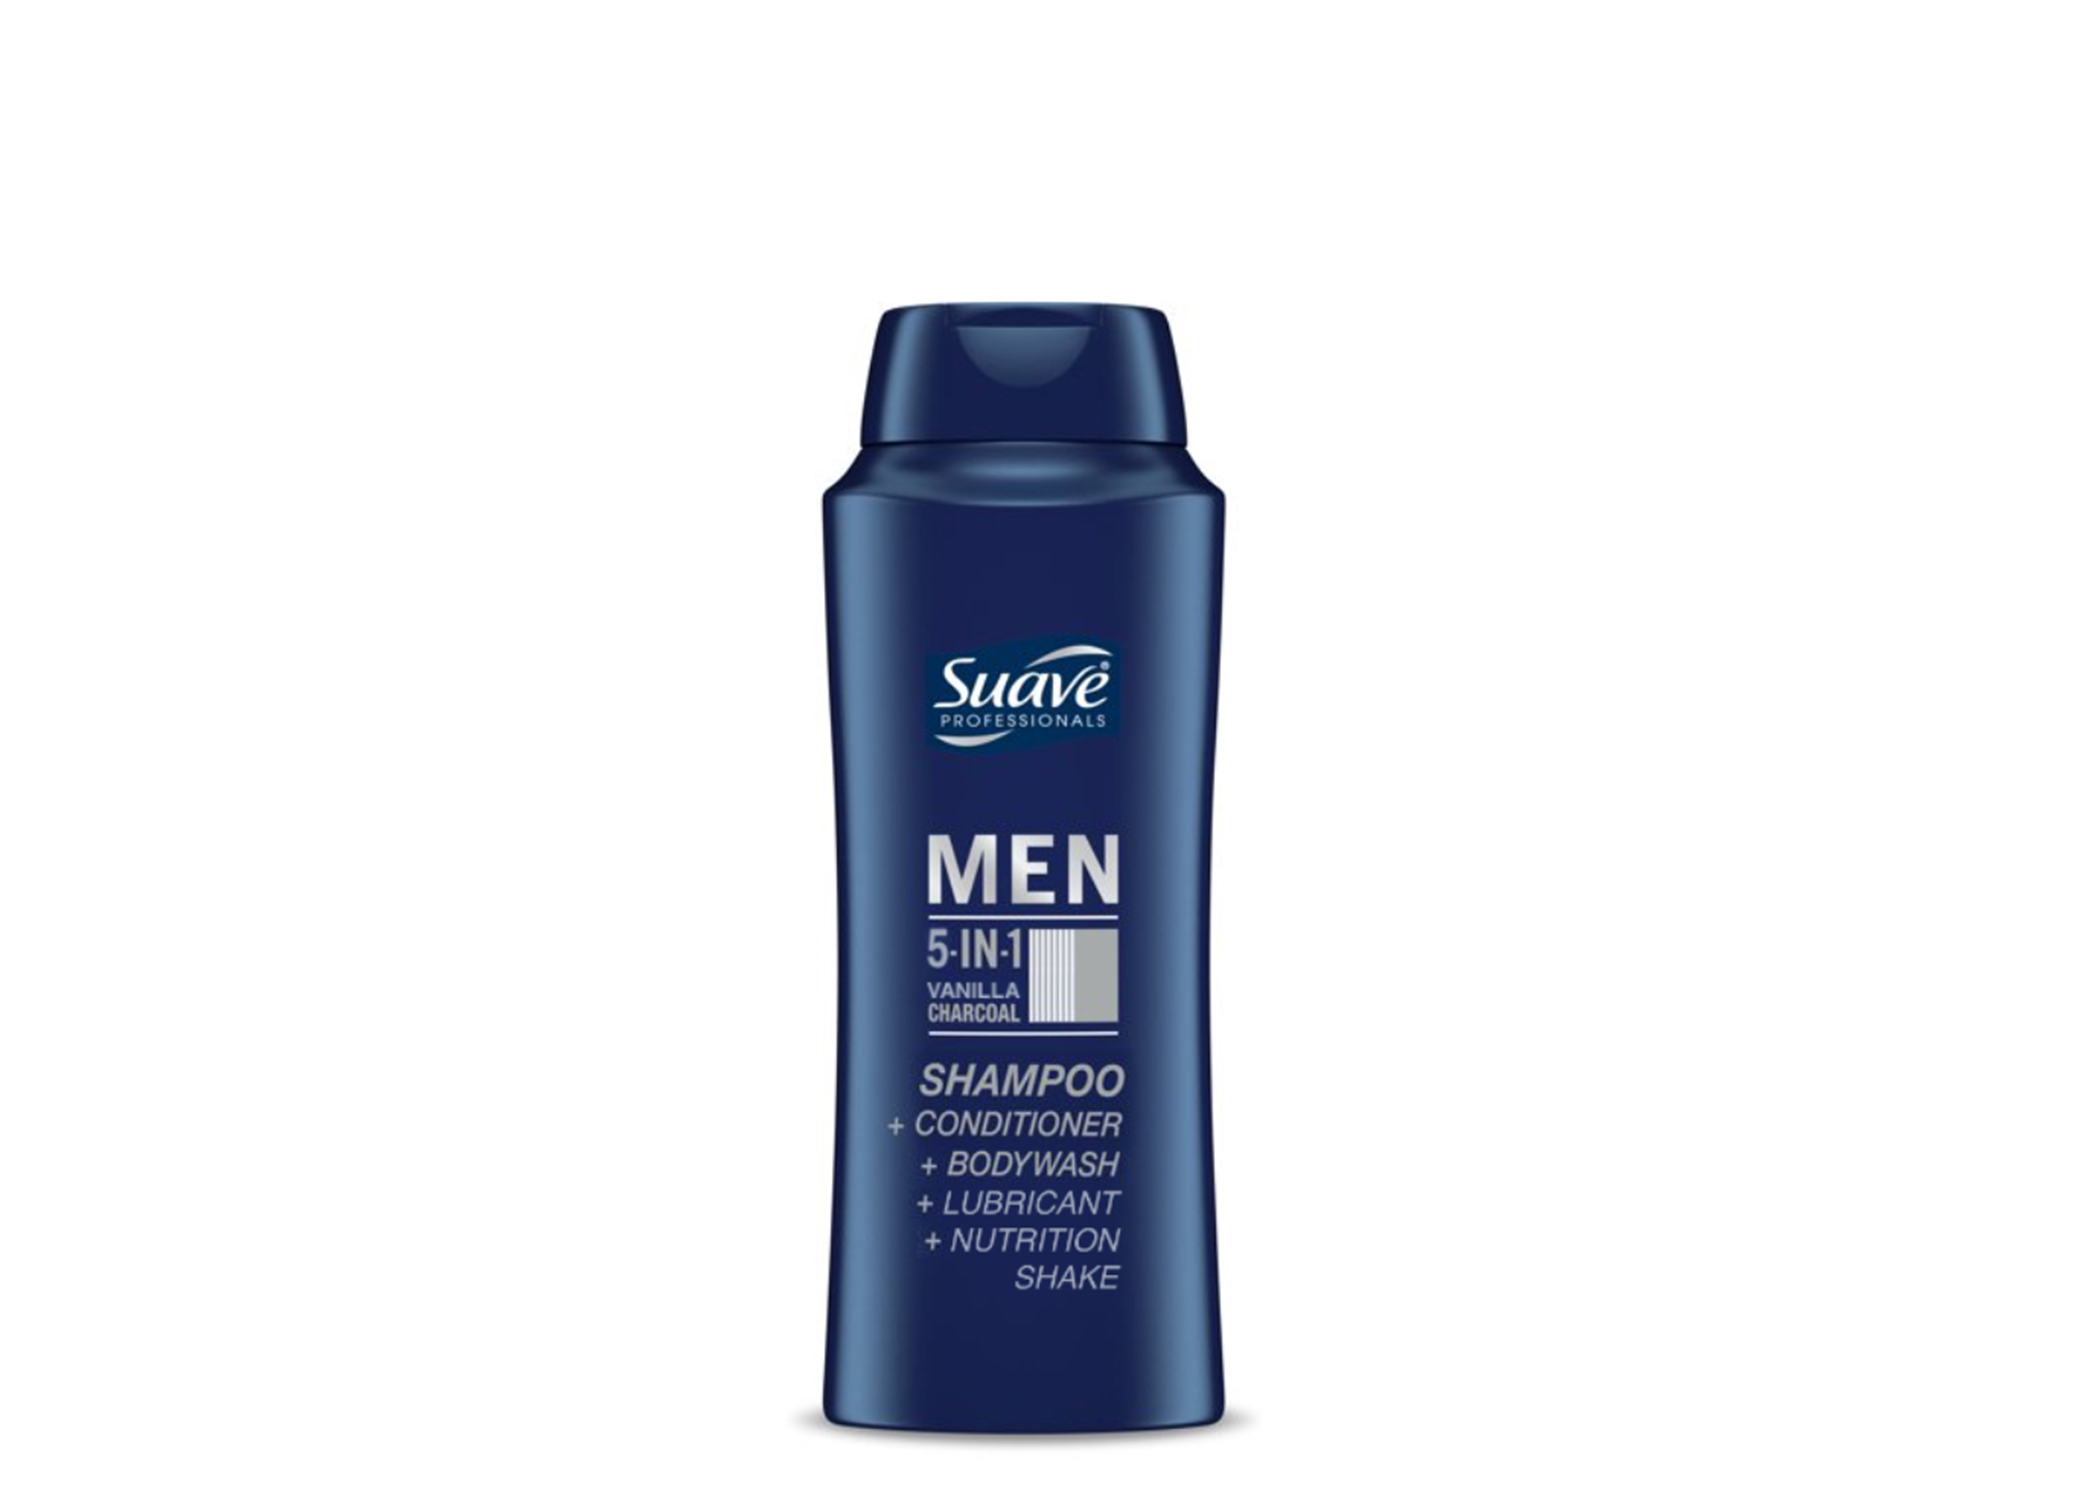 Suave Announces 5-in-1 Shampoo, Conditioner, Body Wash, Lube, And Meal  Replacement